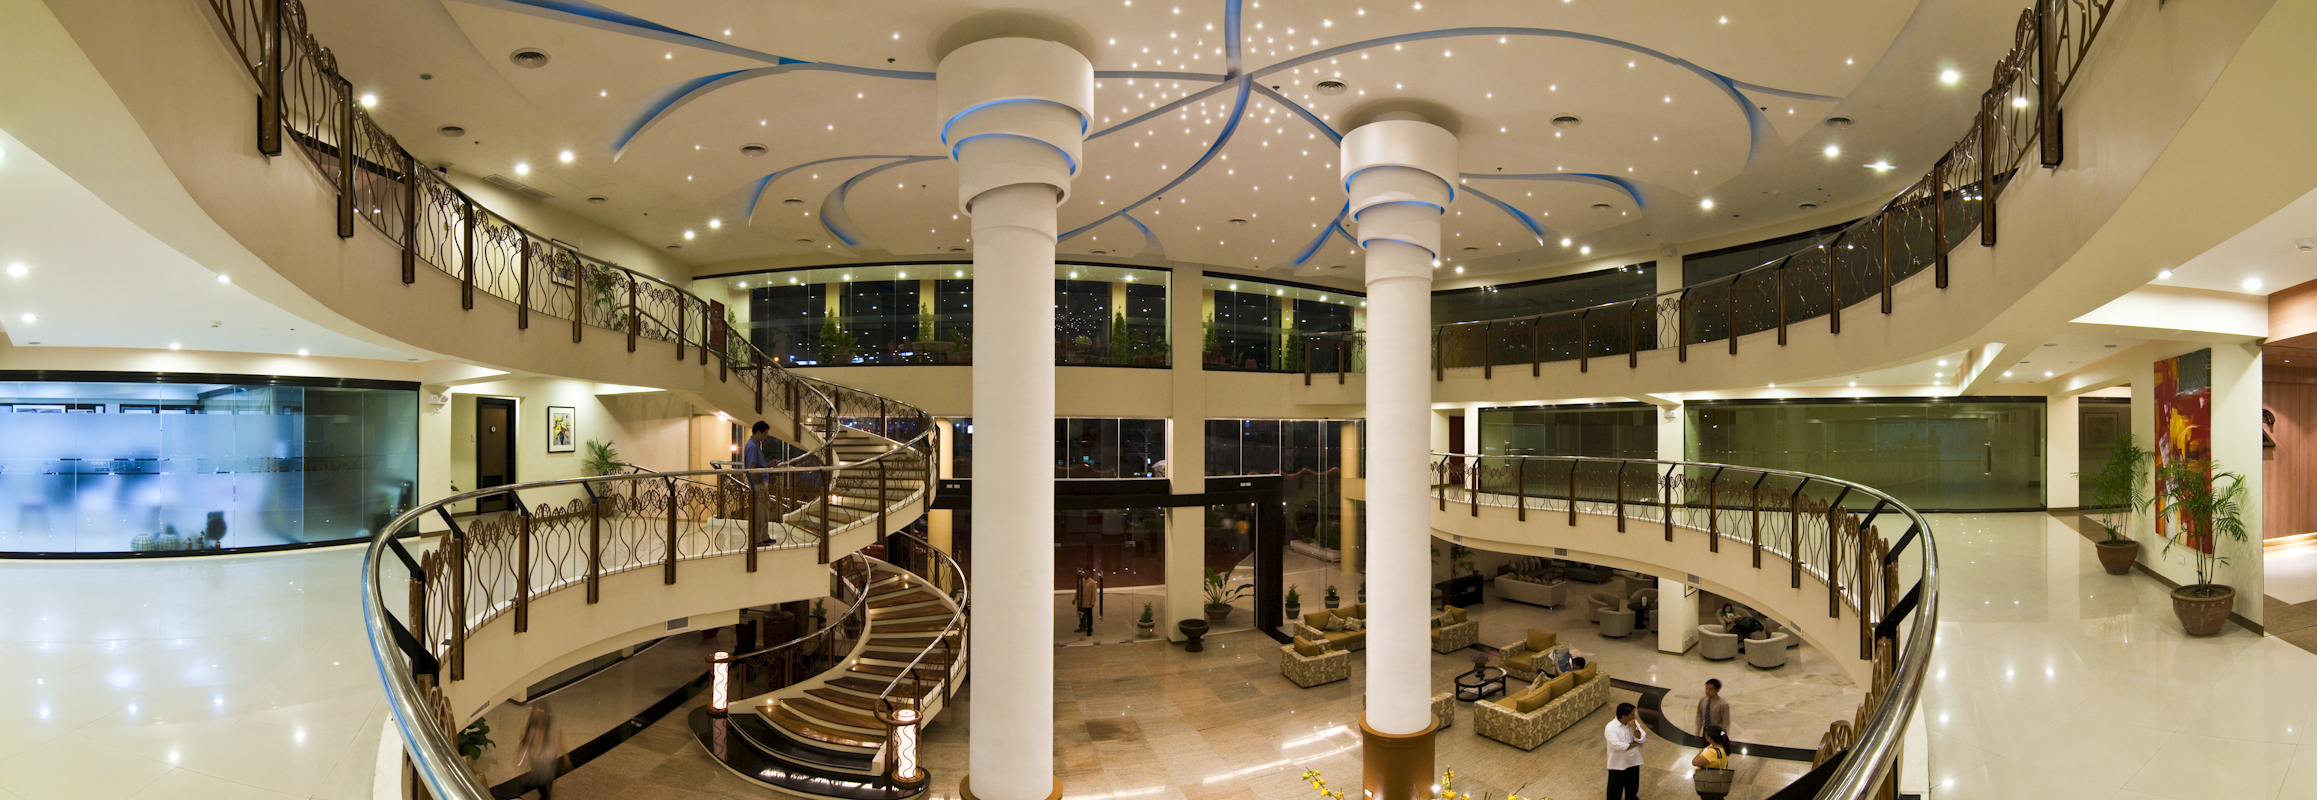 The Pinnacle Hotel and Suites - Lobby 5